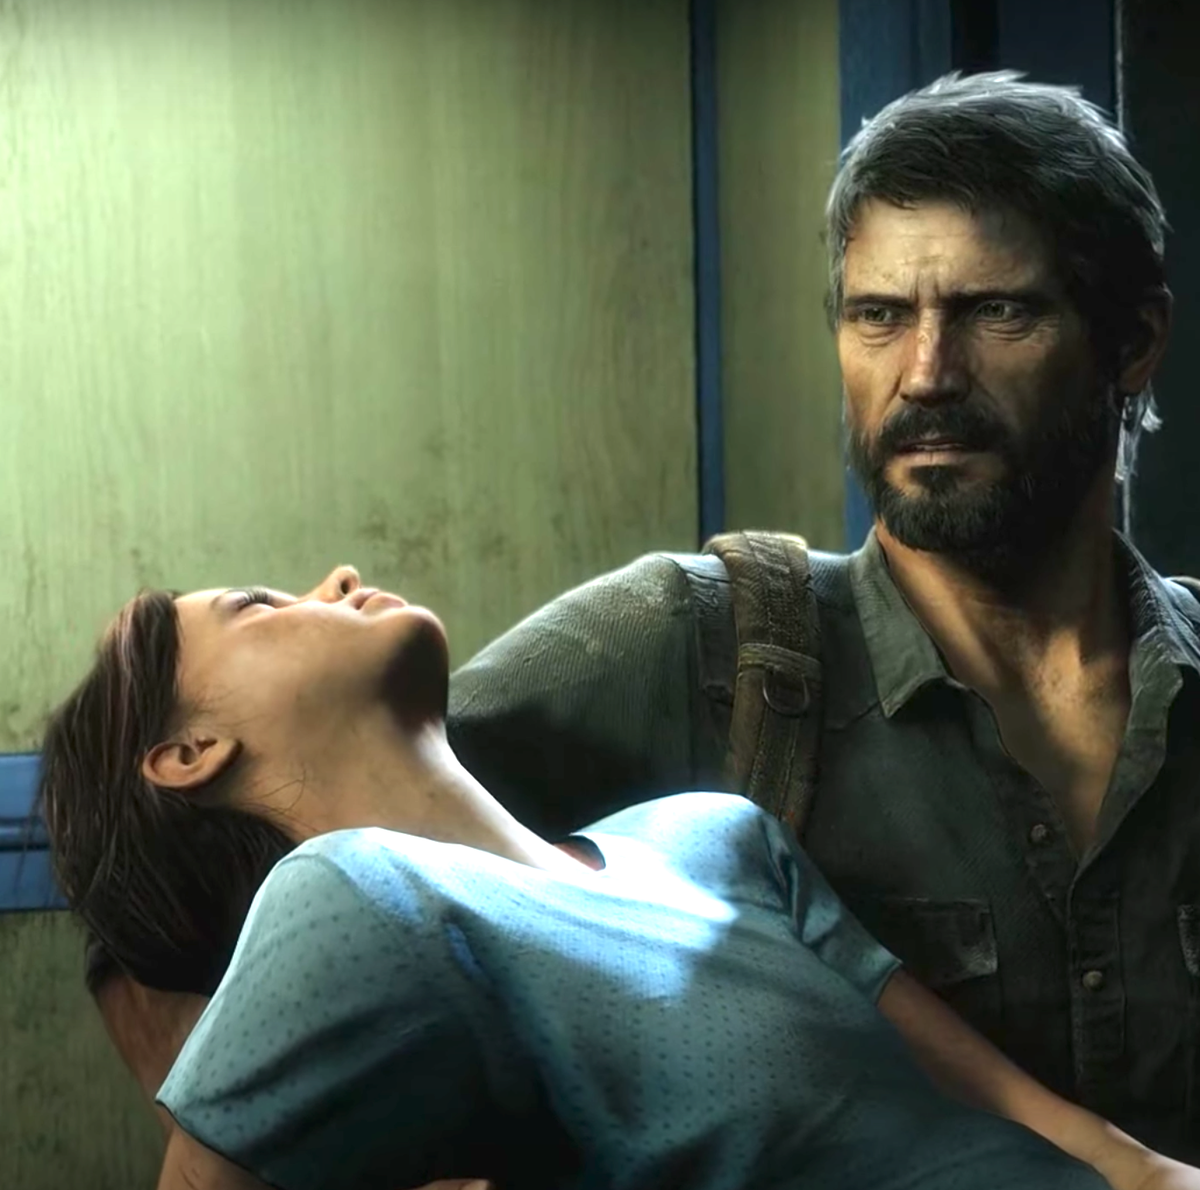 The Last of Us Ending Explained: What Does Ellie's 'Okay' Mean?